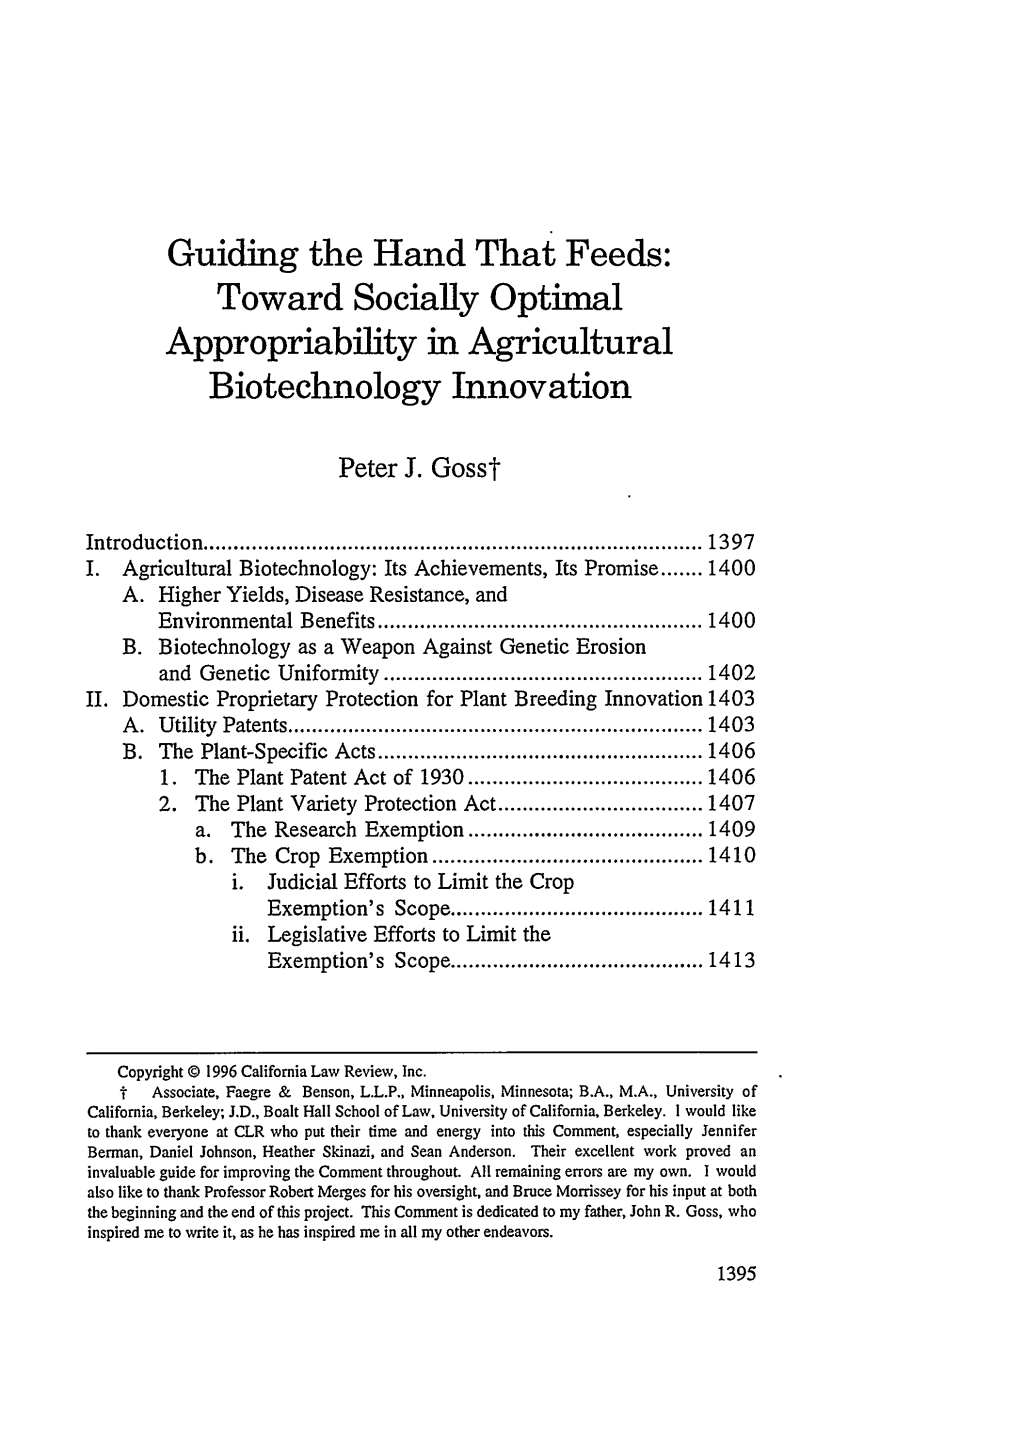 Guiding the Hand That Feeds: Toward Socially Optimal Appropriability in Agricultural Biotechnology Innovation